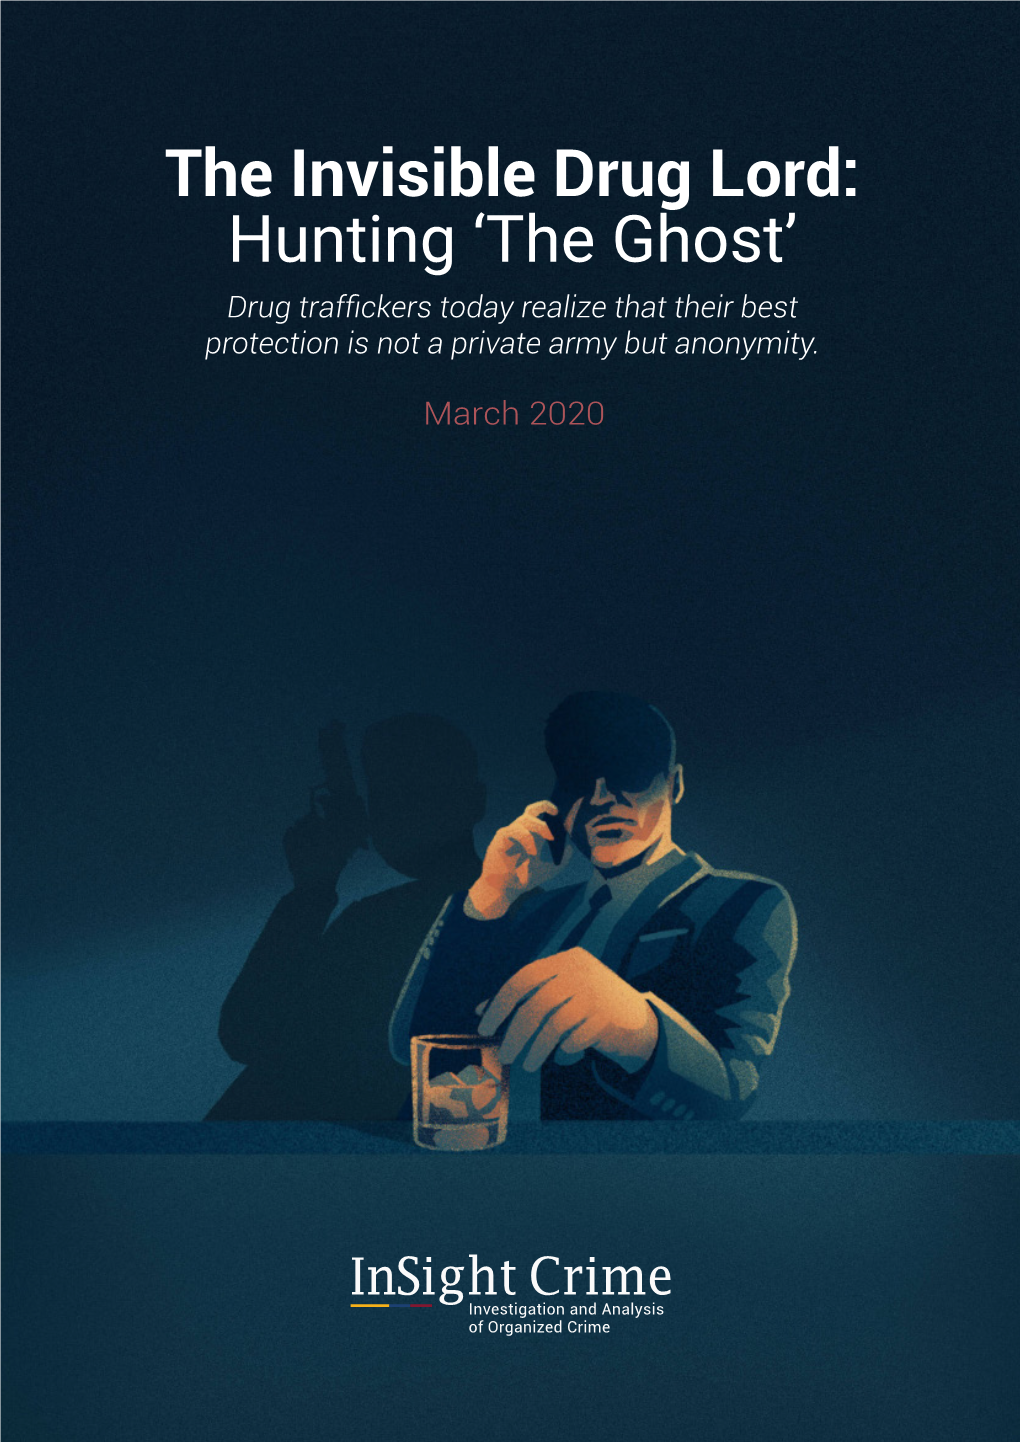 The Invisible Drug Lord: Hunting 'The Ghost'